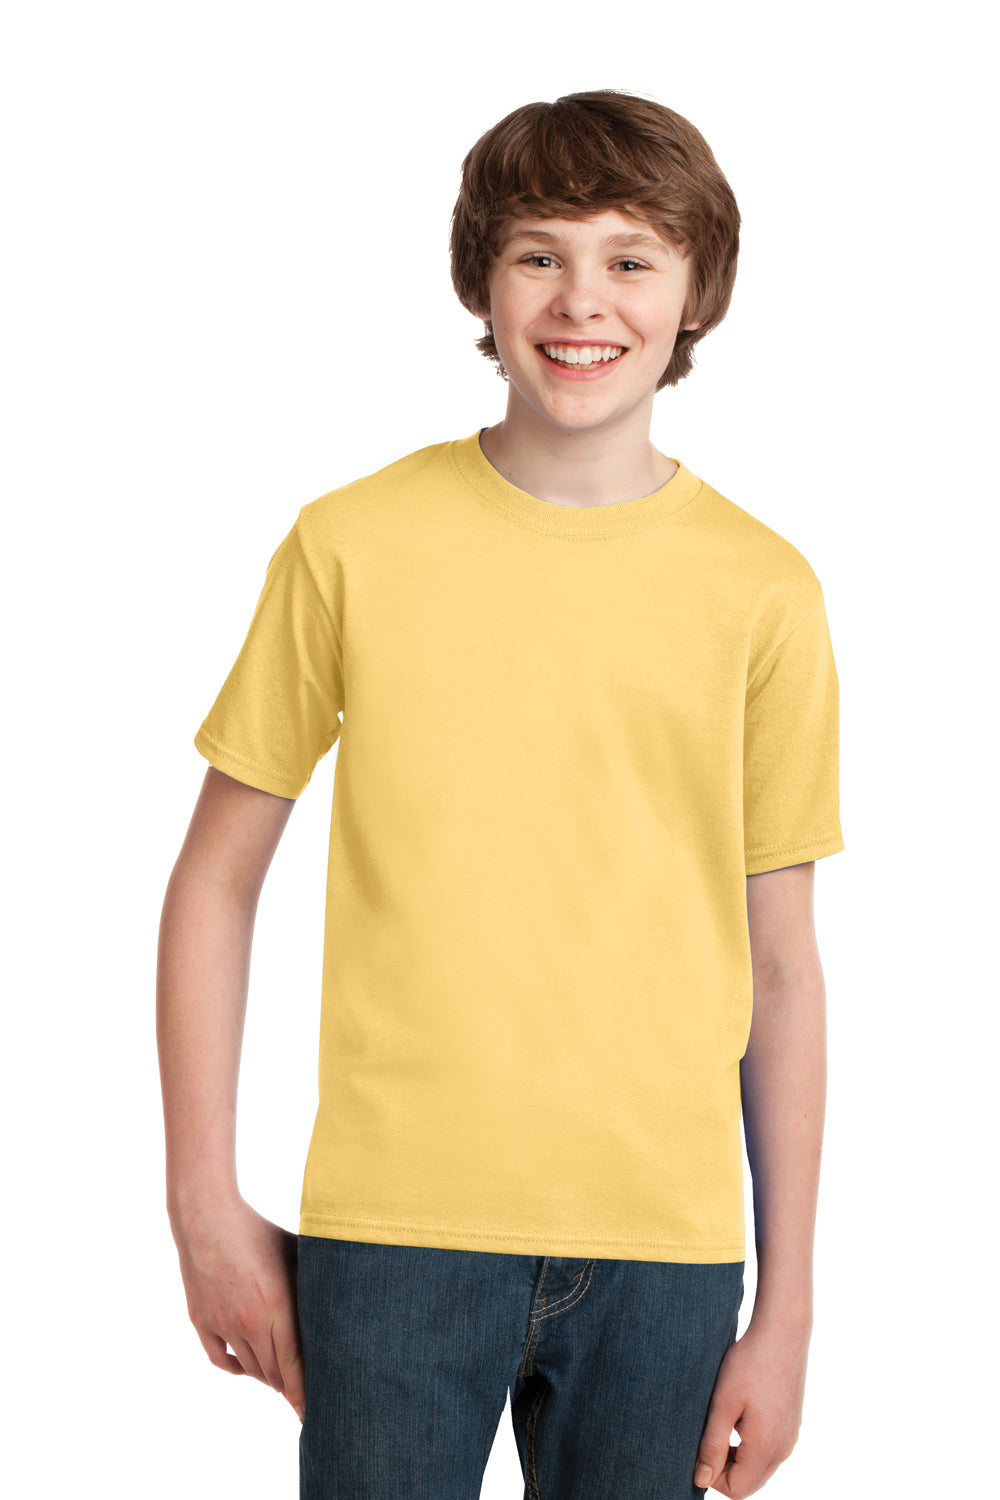 Port & Company PC61Y Youth Essential Short Sleeve Crewneck T-Shirt Daffodil Yellow Front